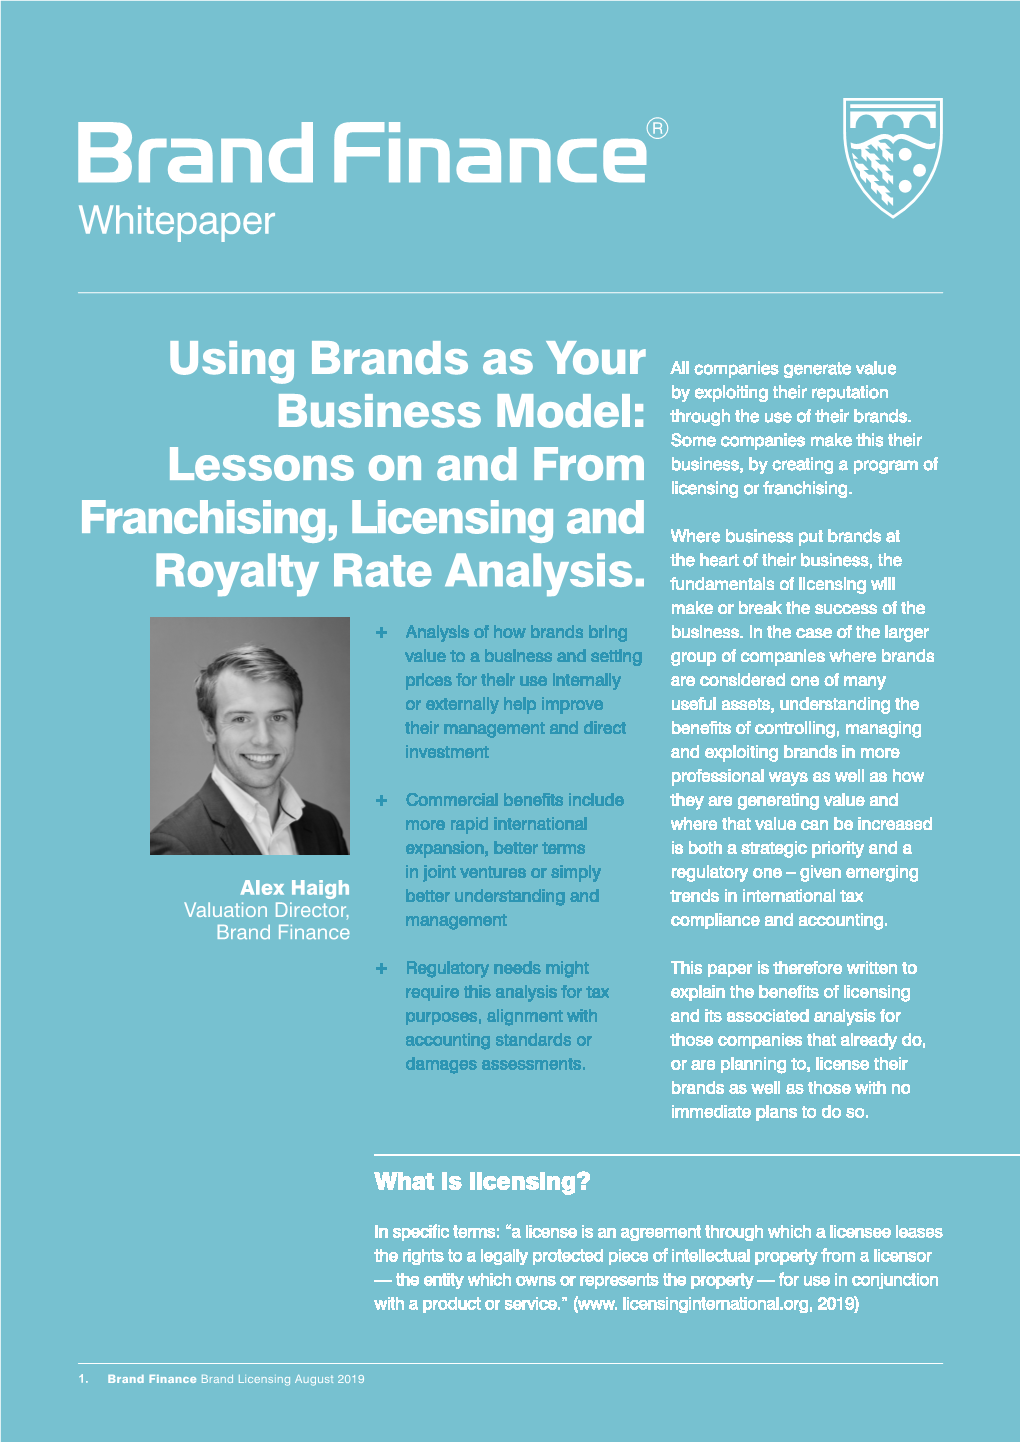 Using Brands As Your Business Model: Lessons on and from Franchising, Licensing and Royalty Rate Analysis